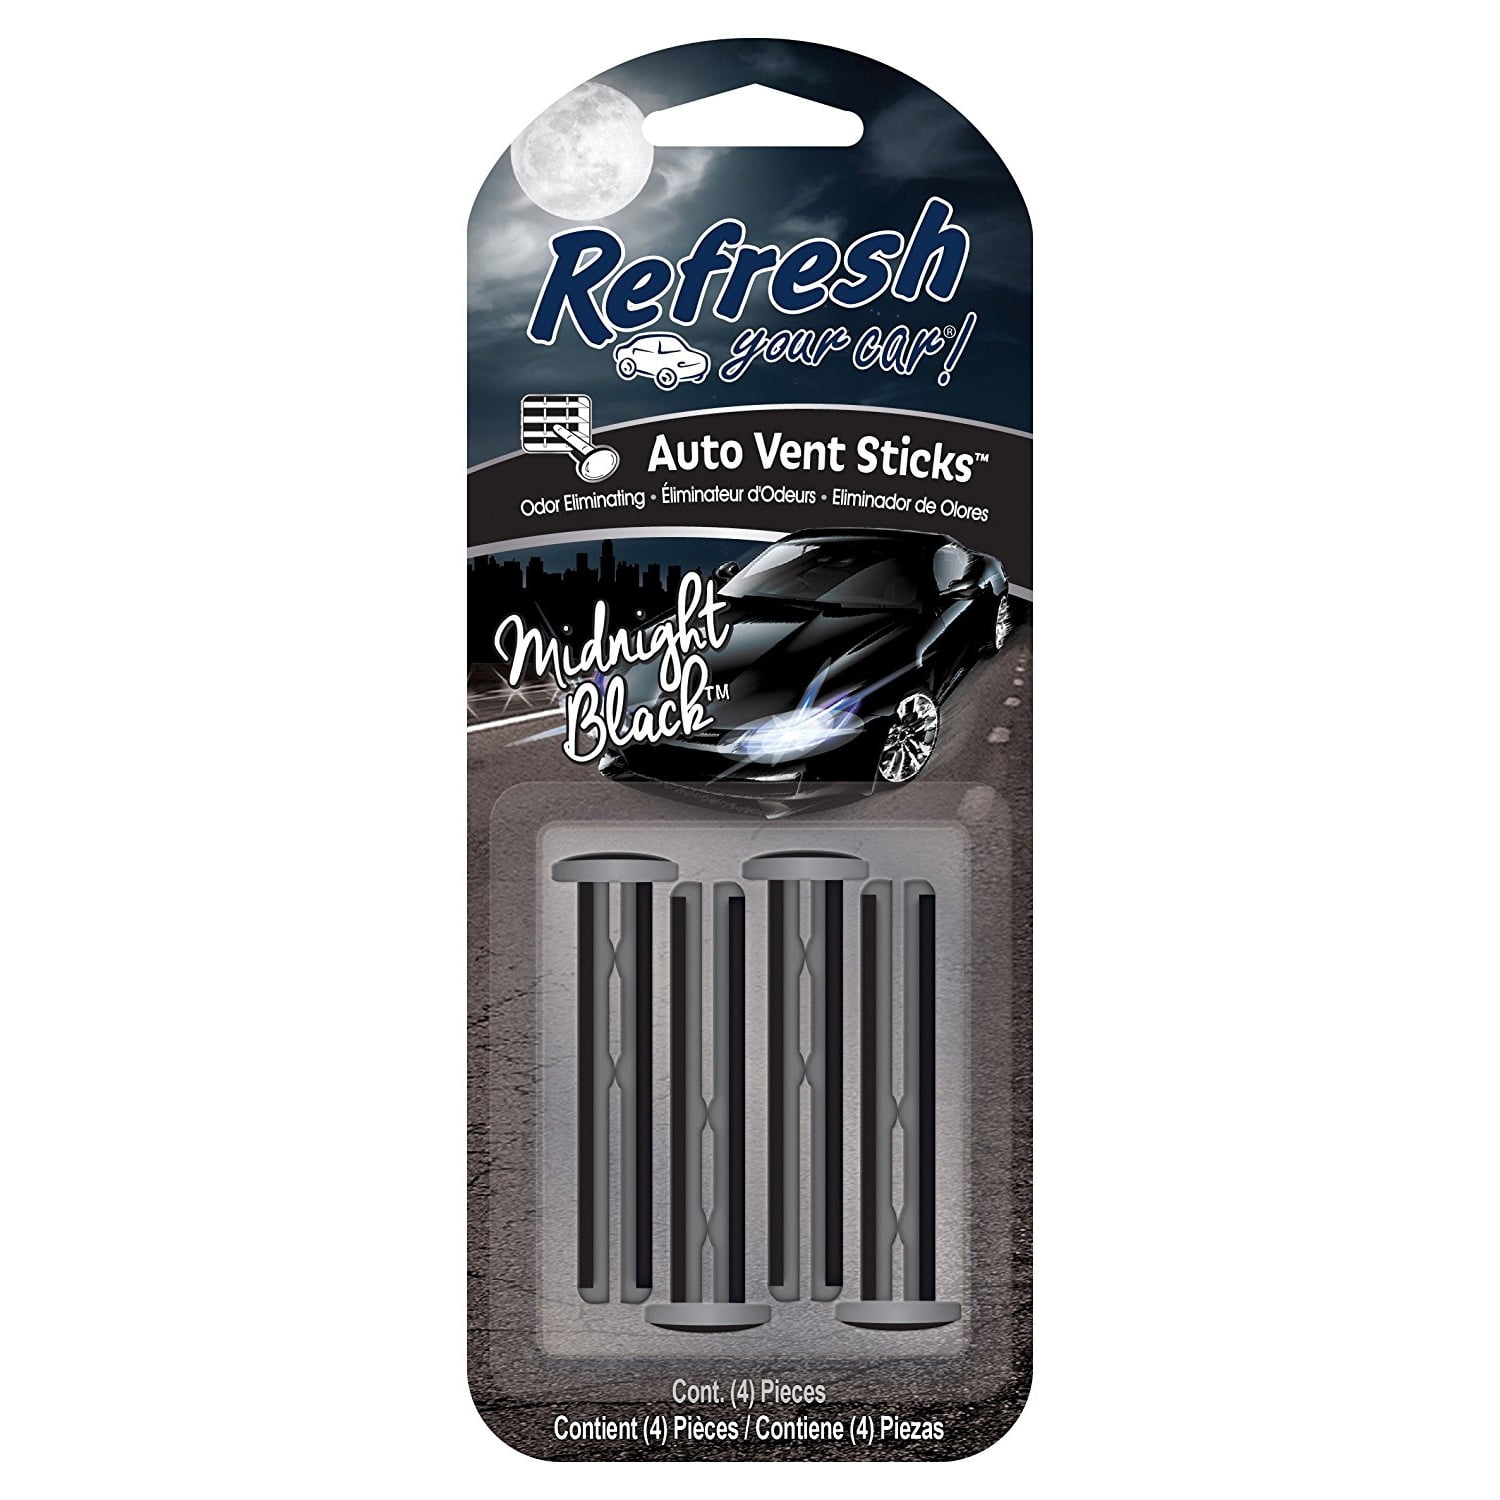 Refresh Your Car Vent Wrap New Car Scent 4 Pack